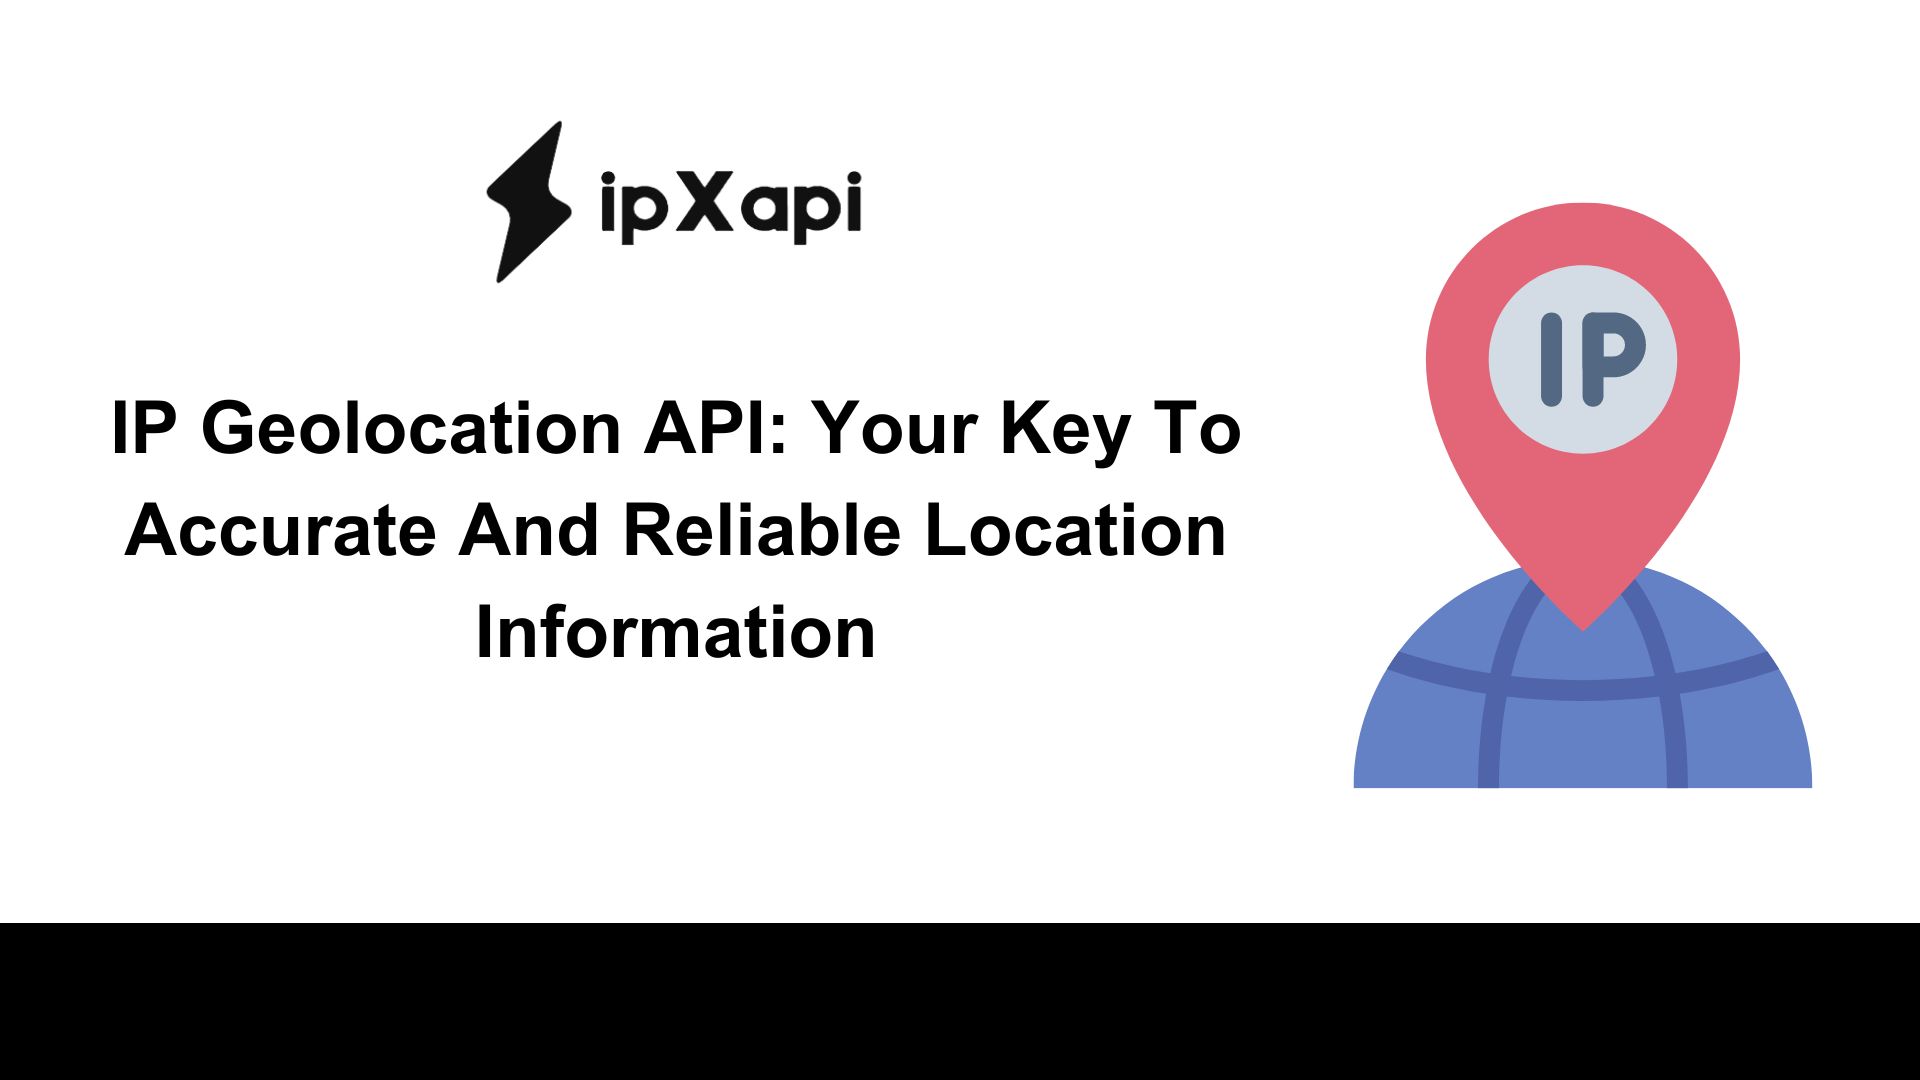 IP Geolocation API: Your Key To Accurate And Reliable Location Information